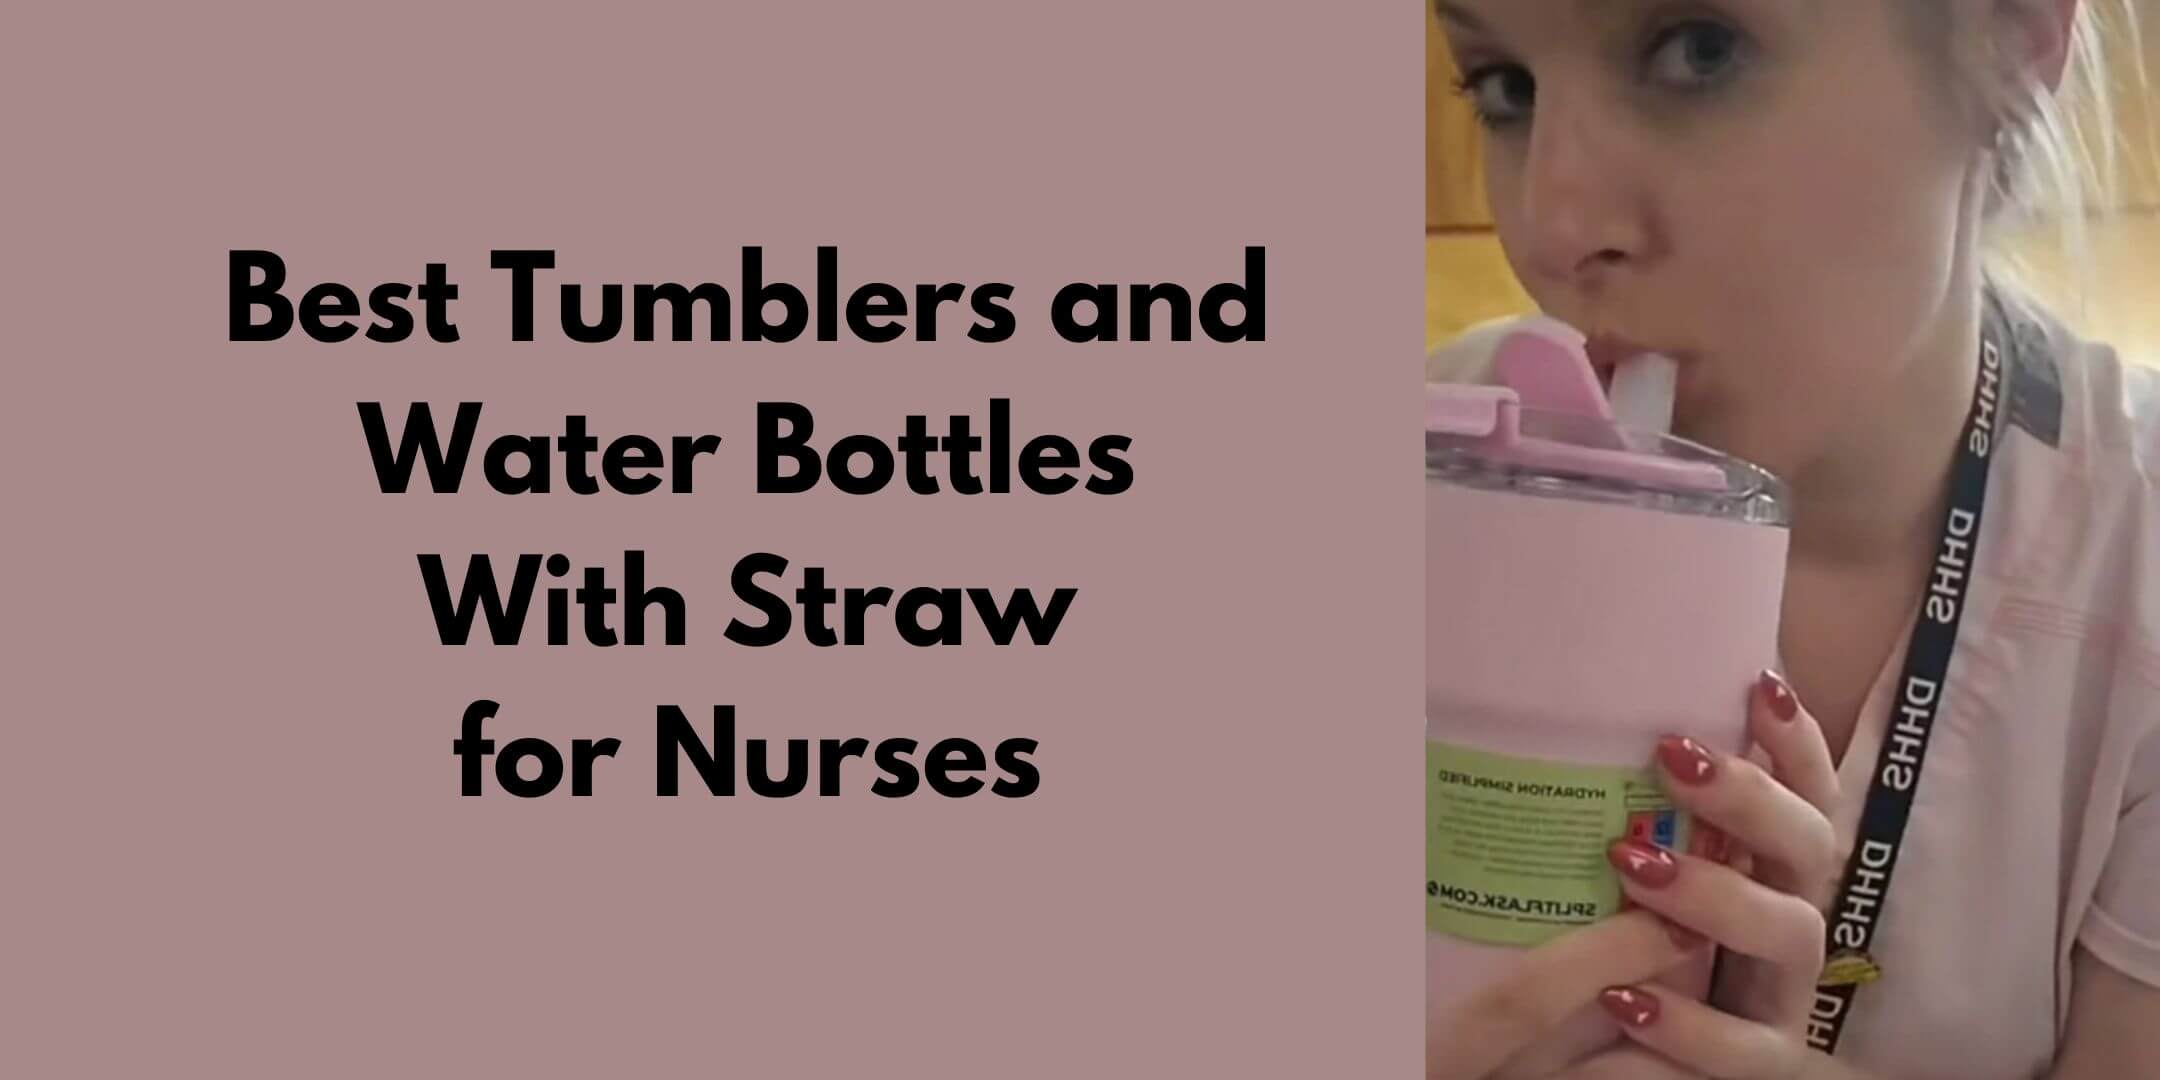 Best Tumblers and Water Bottles for Nurses